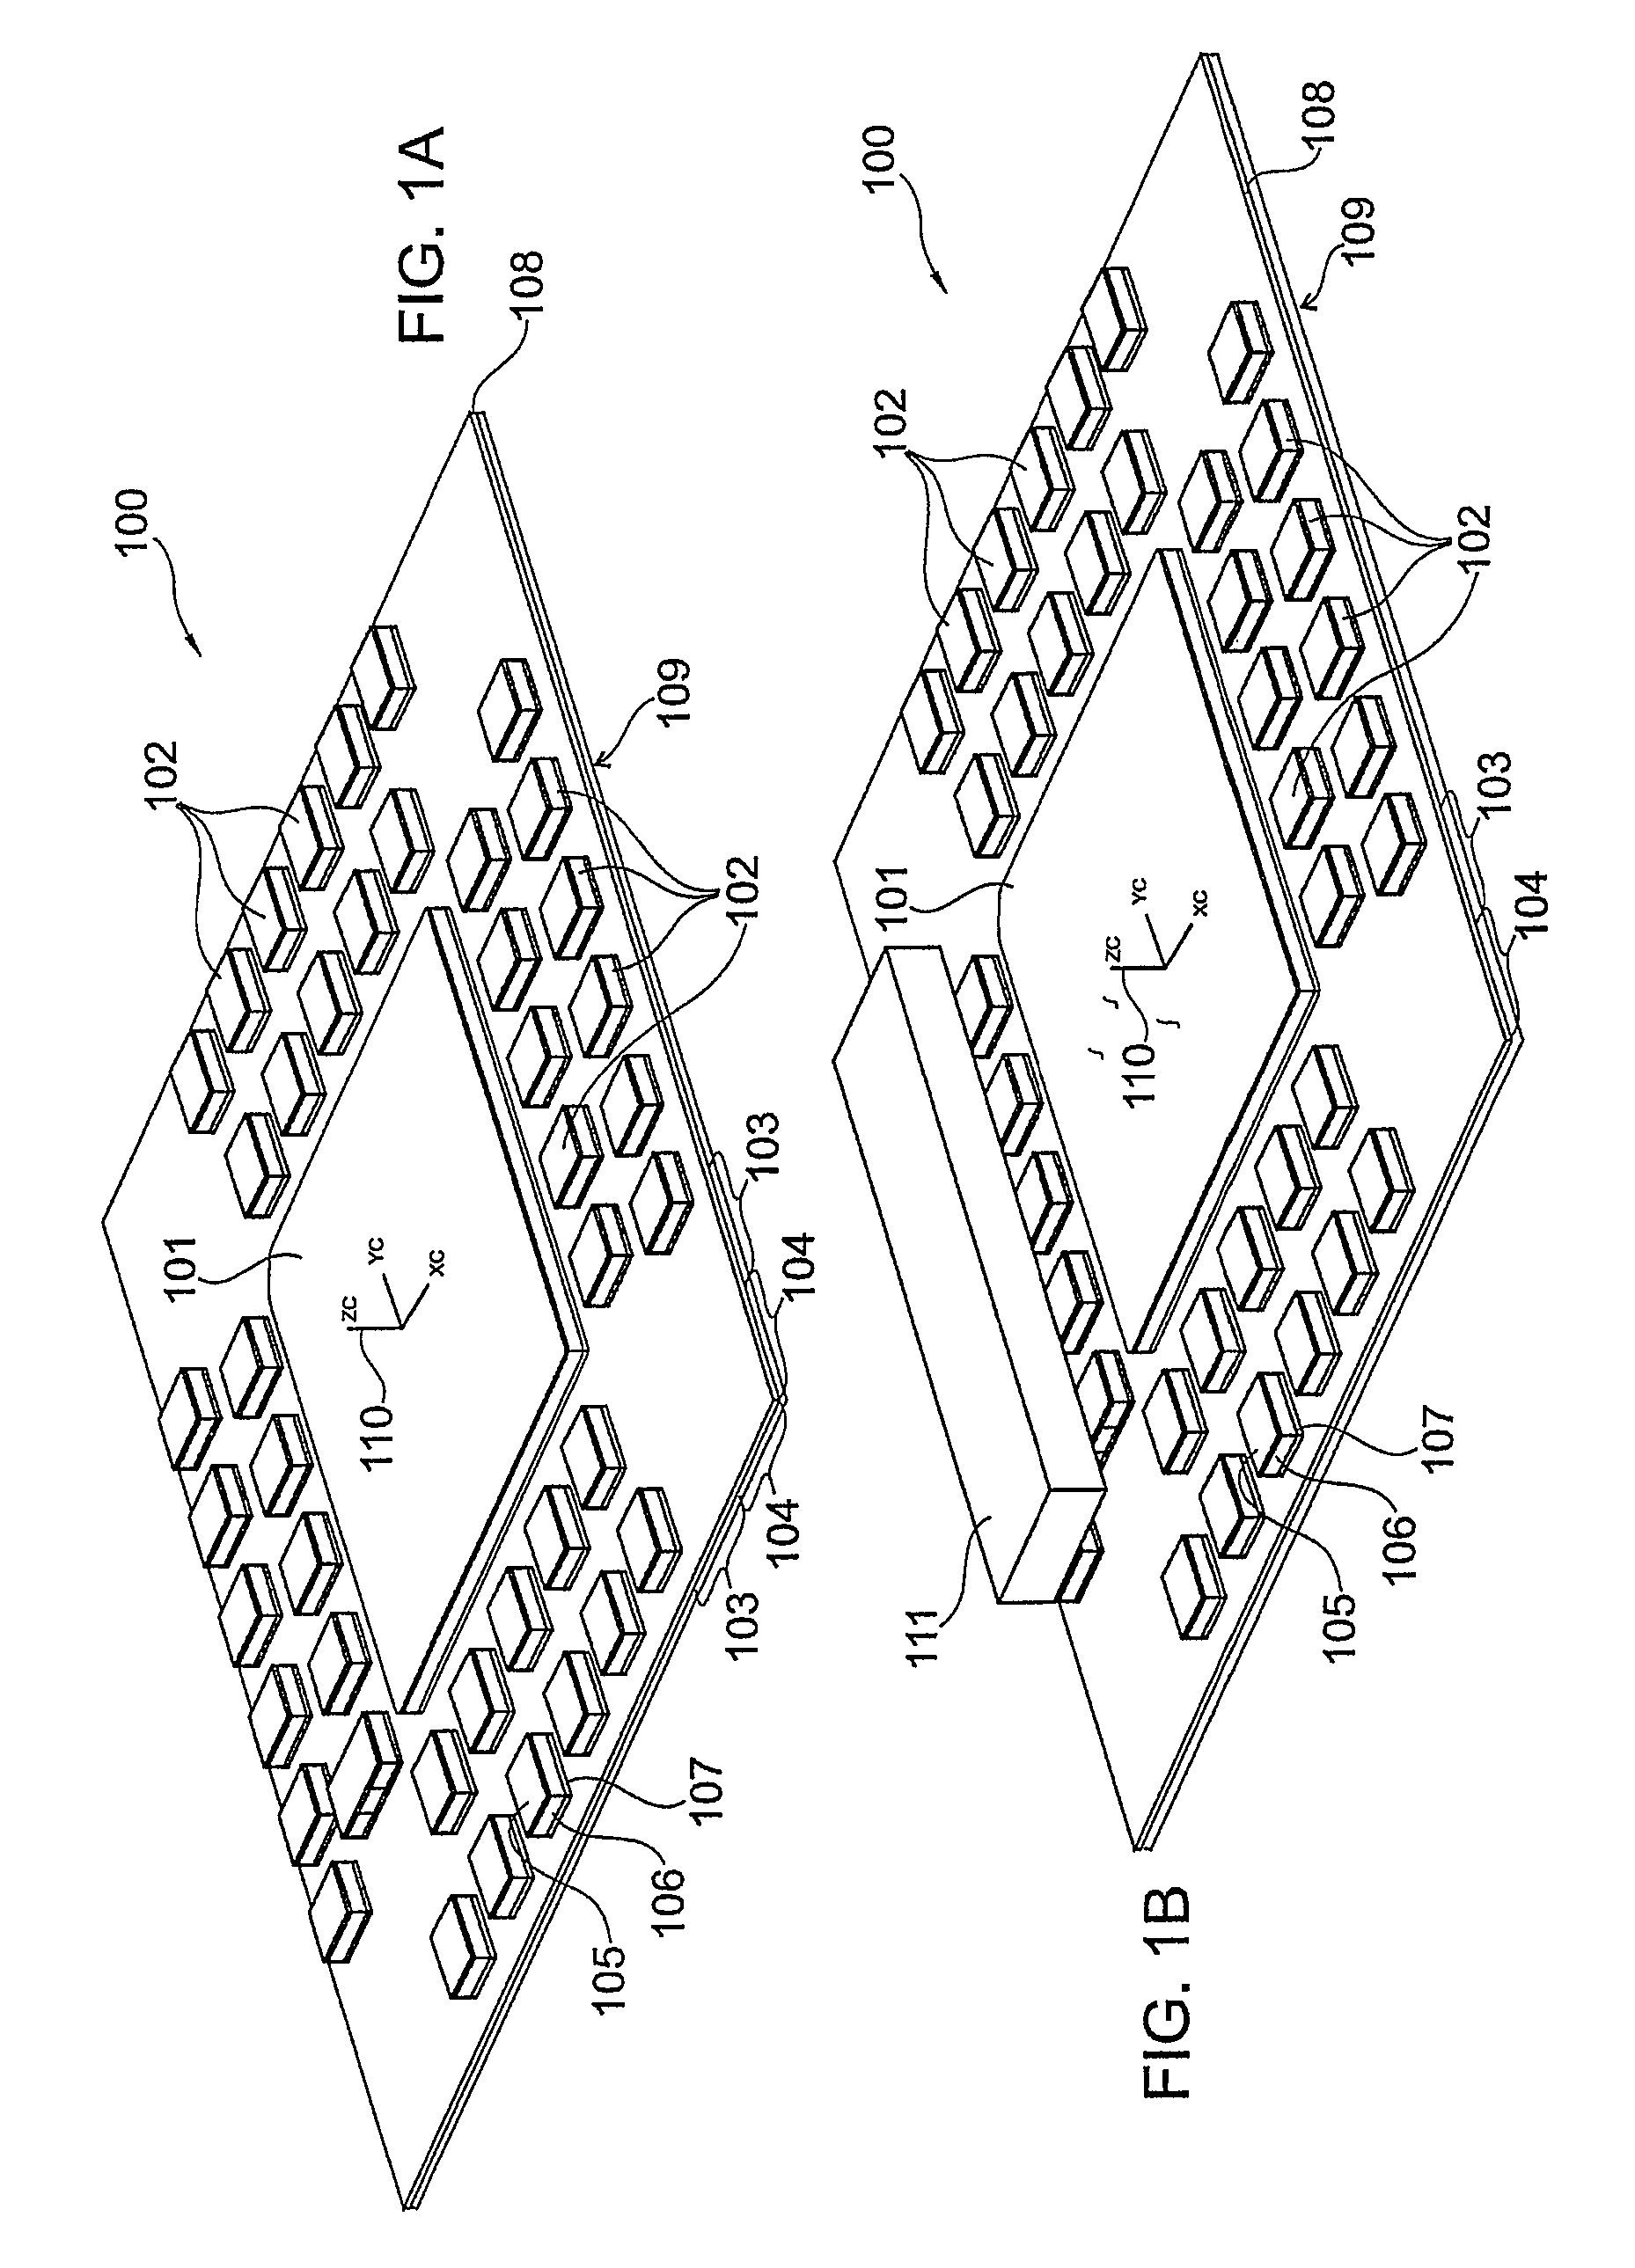 Package, method of manufacturing a package and frame